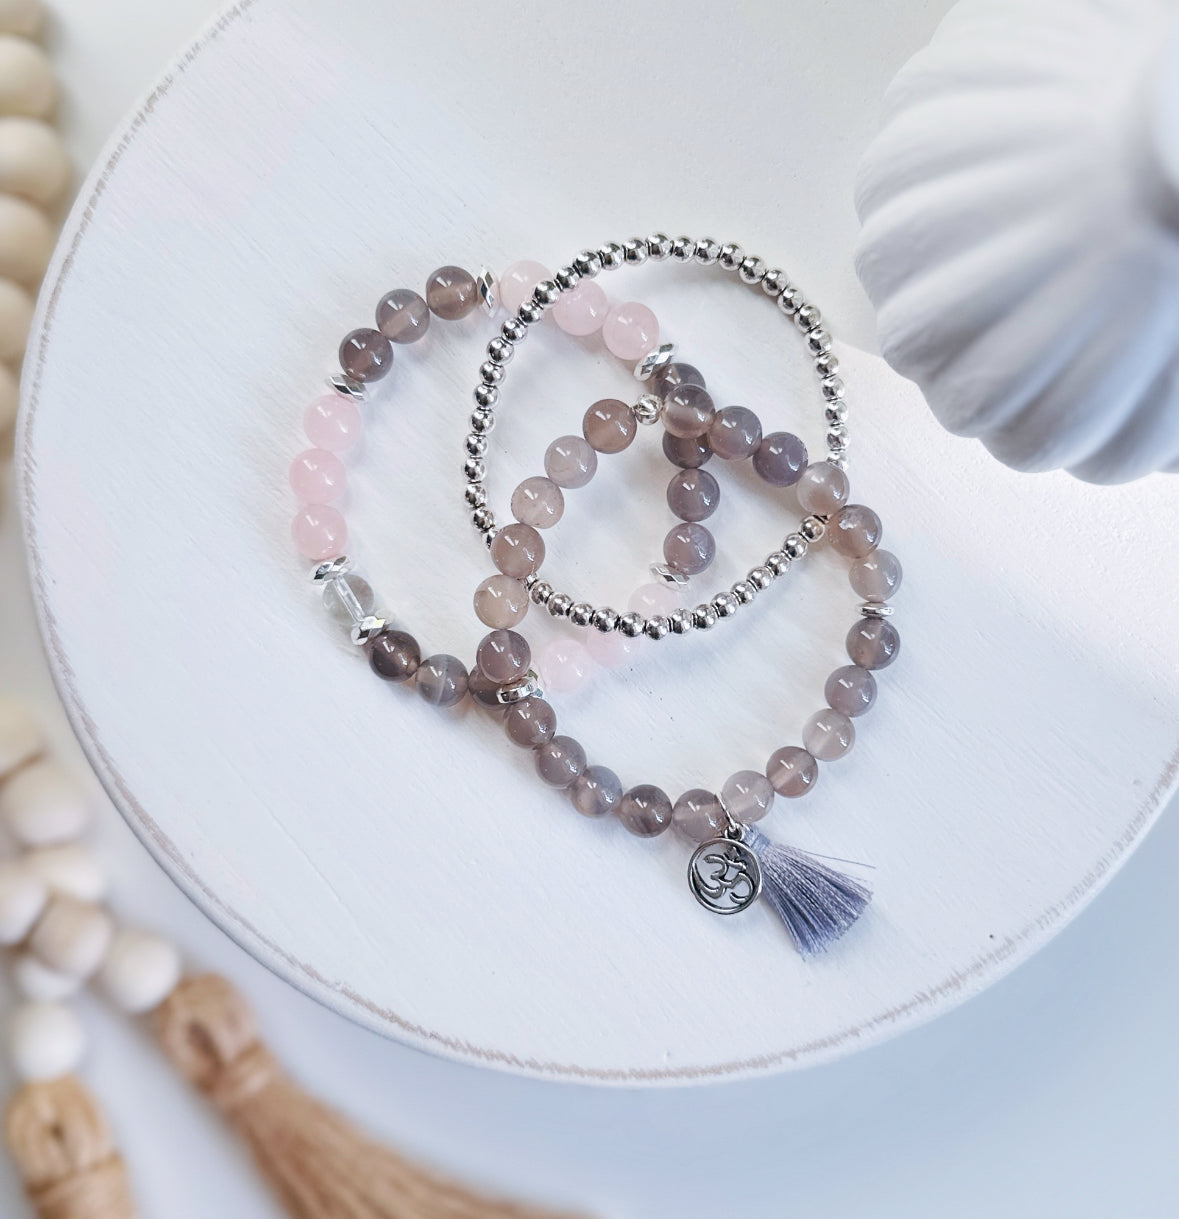 The Grey Agate Stack